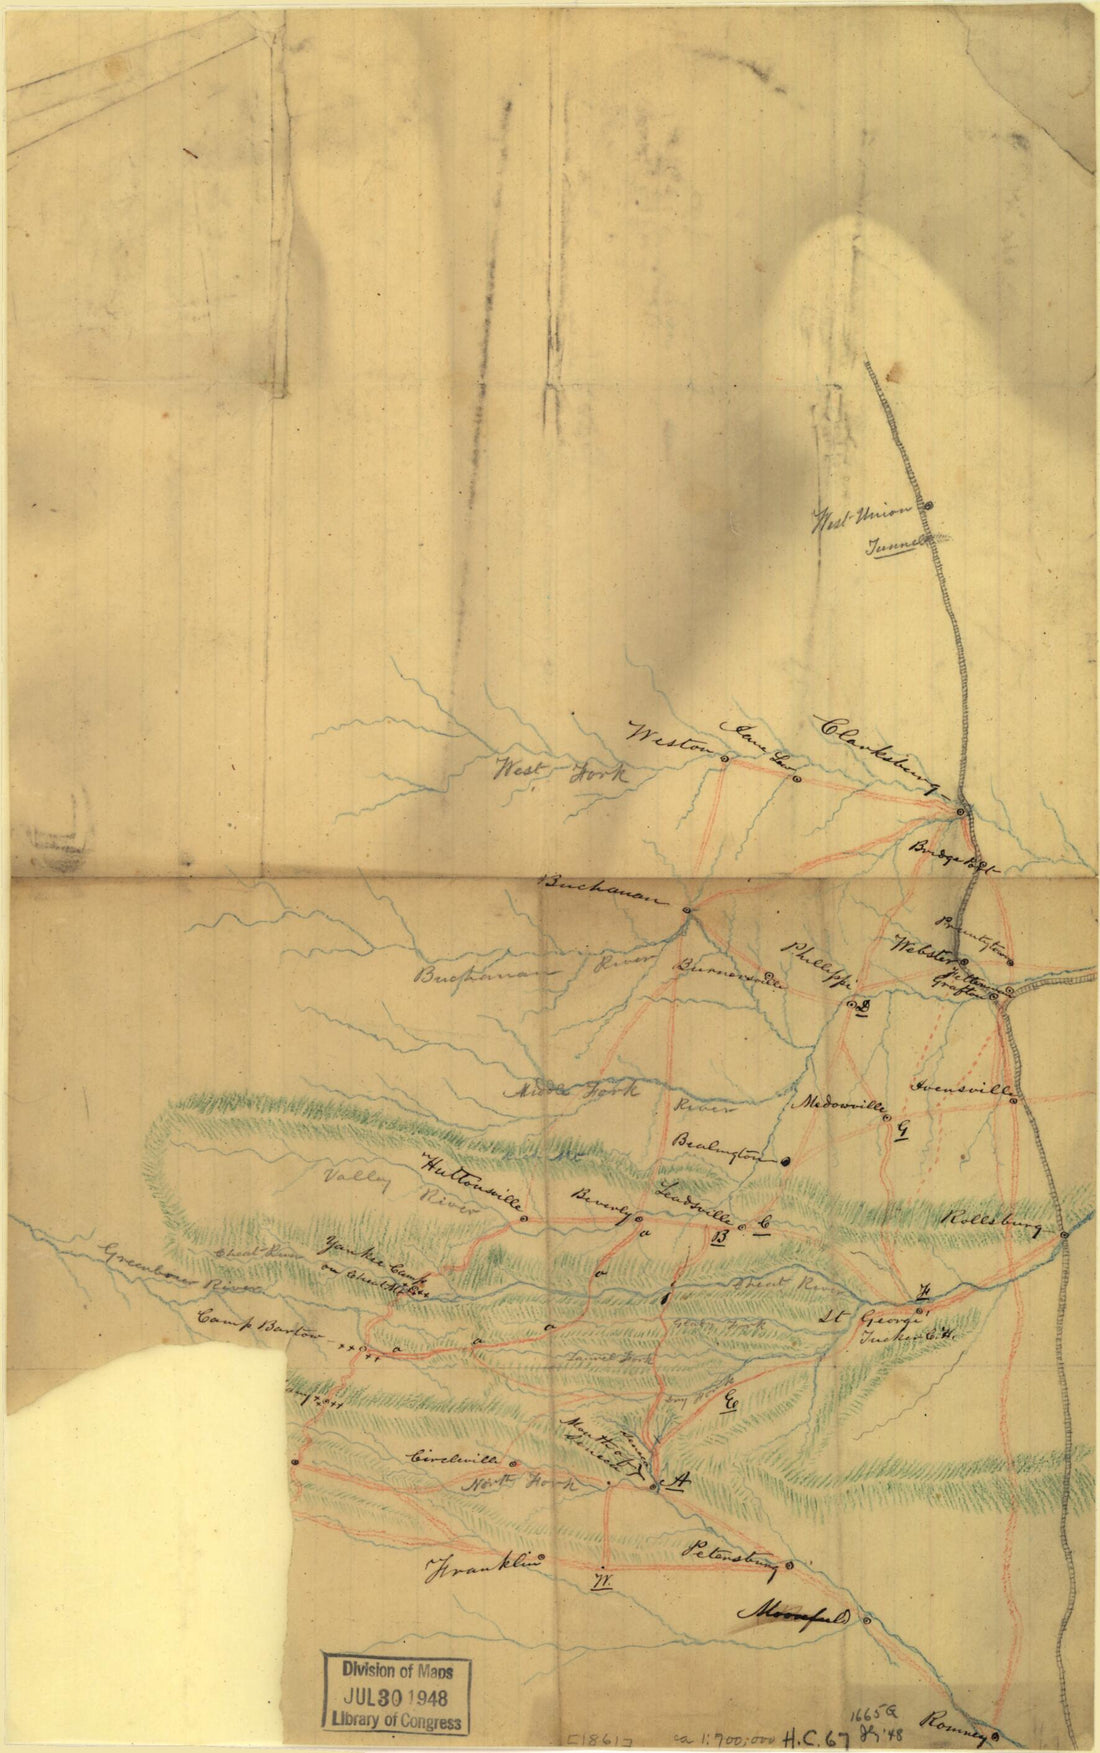 This old map of Map of Part of Eastern West Virginia, Extending from Romney Westward to Clarksburg, Centering On the Rich Mountain Battle Area from 1861 was created by  in 1861